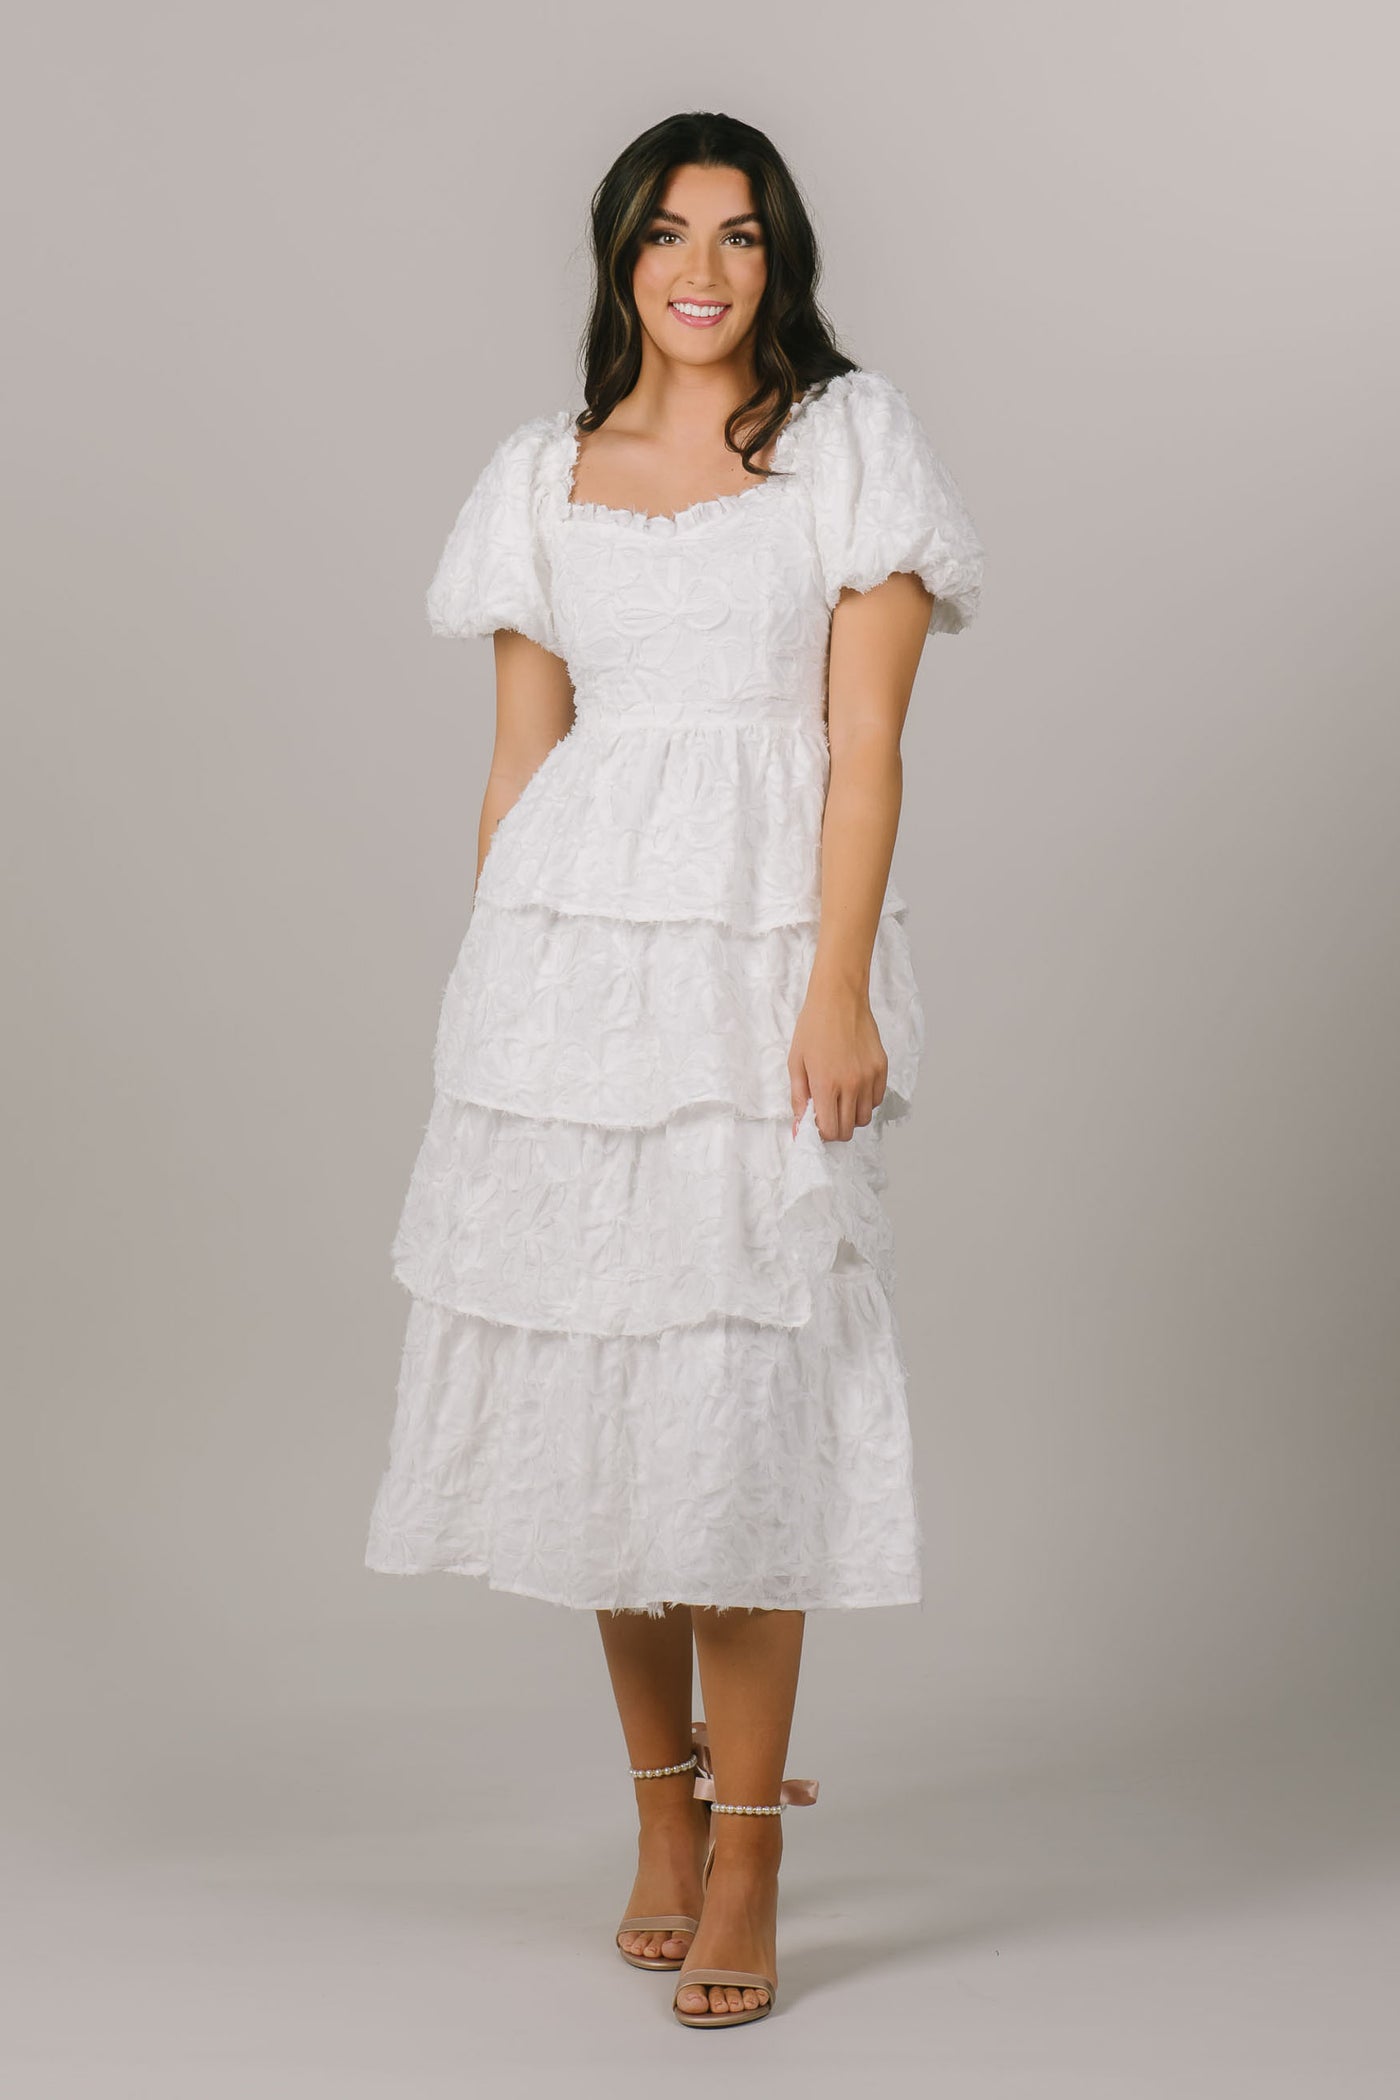 This modest getaway dress features lacy white details and a fun ruffled skirt.